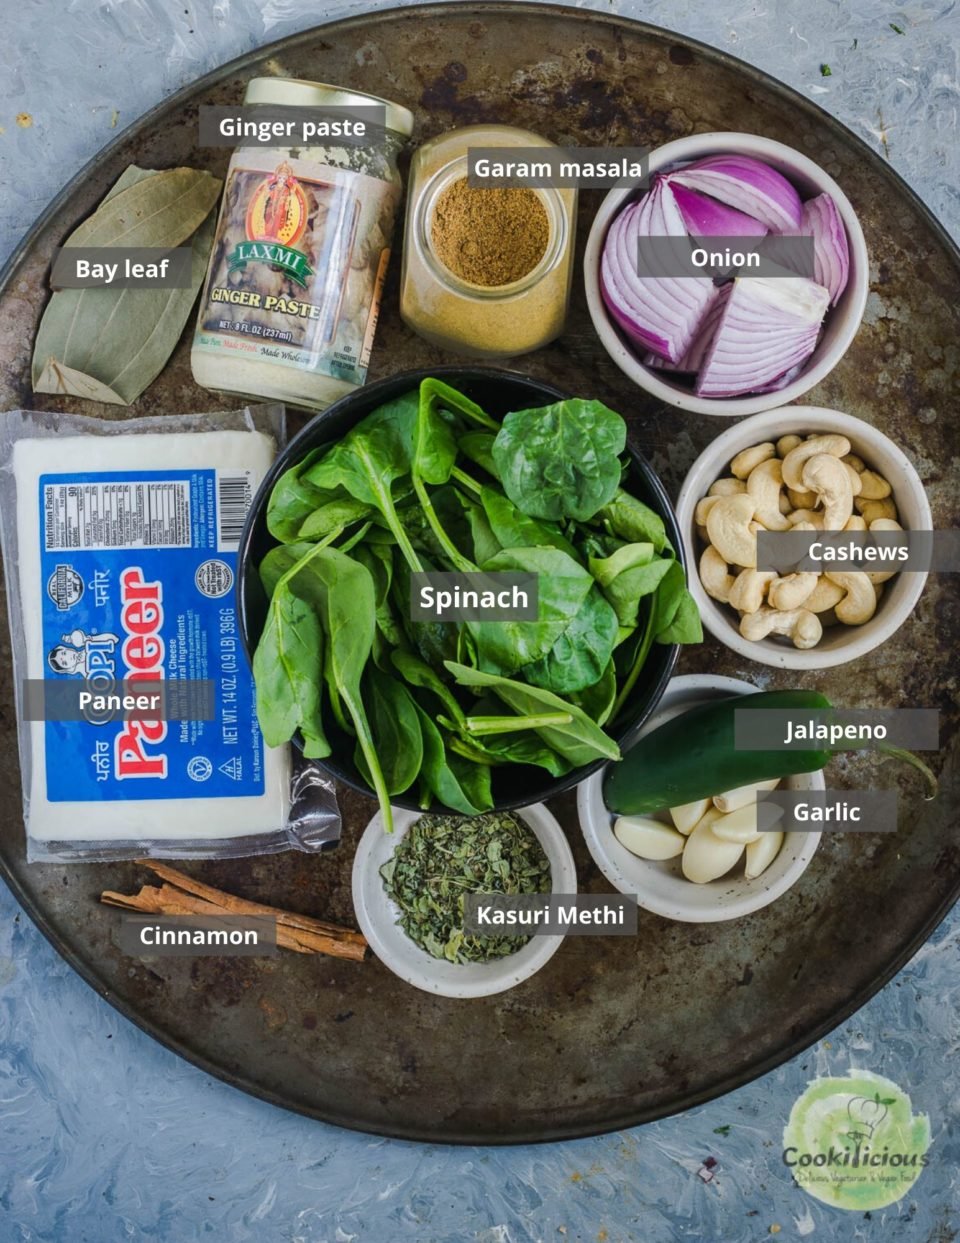 all the ingredients needed to make palak paneer placed on a tray